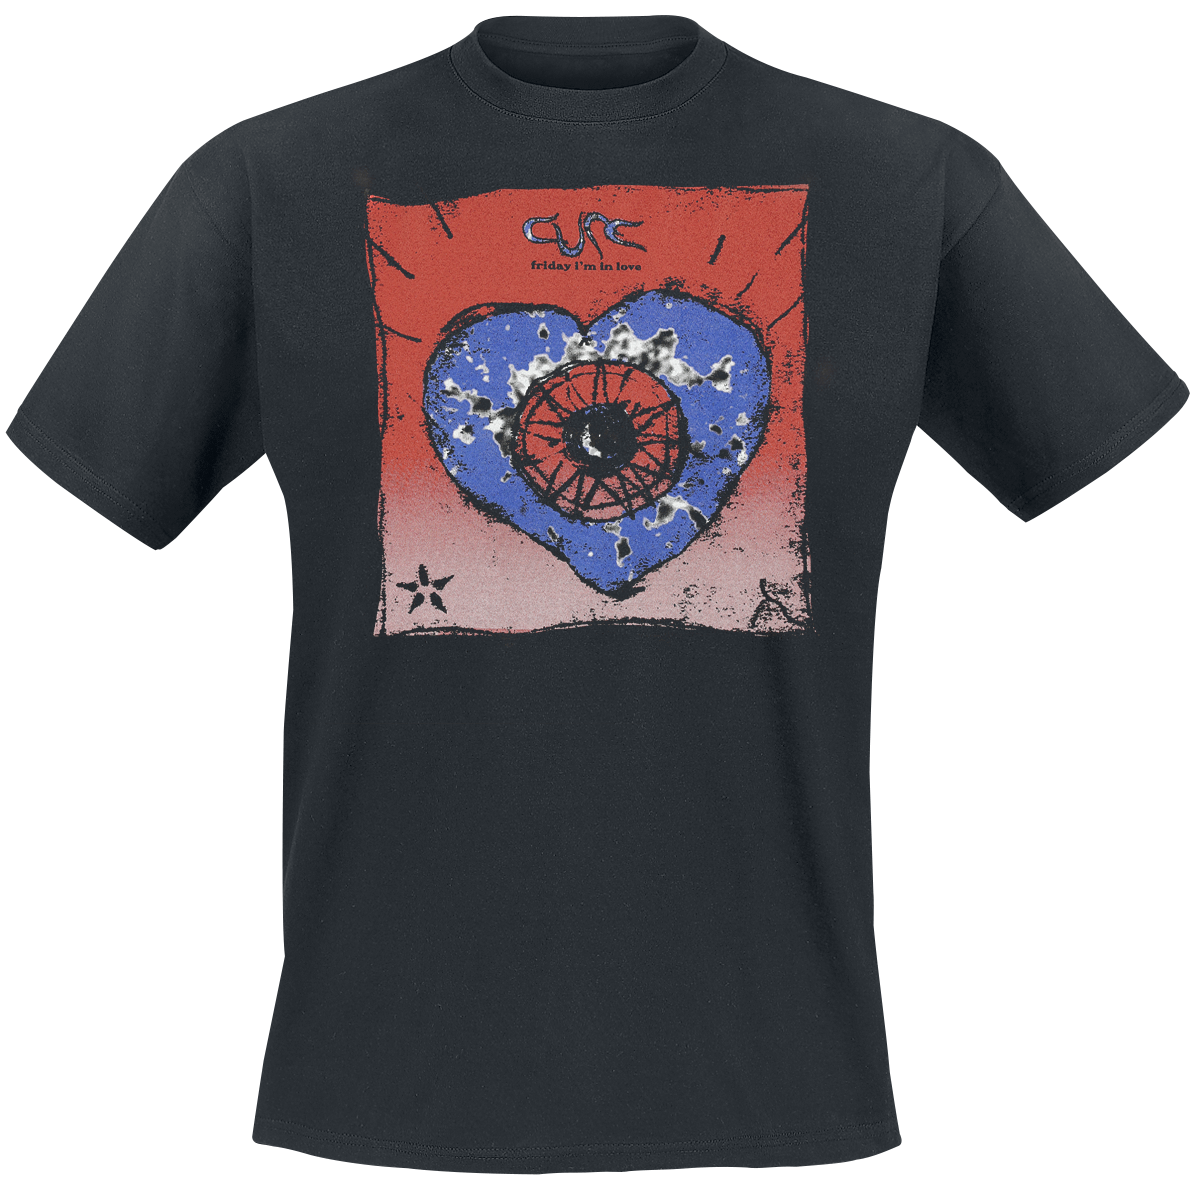 The Cure - Friday I`m In Love - T-Shirt - schwarz